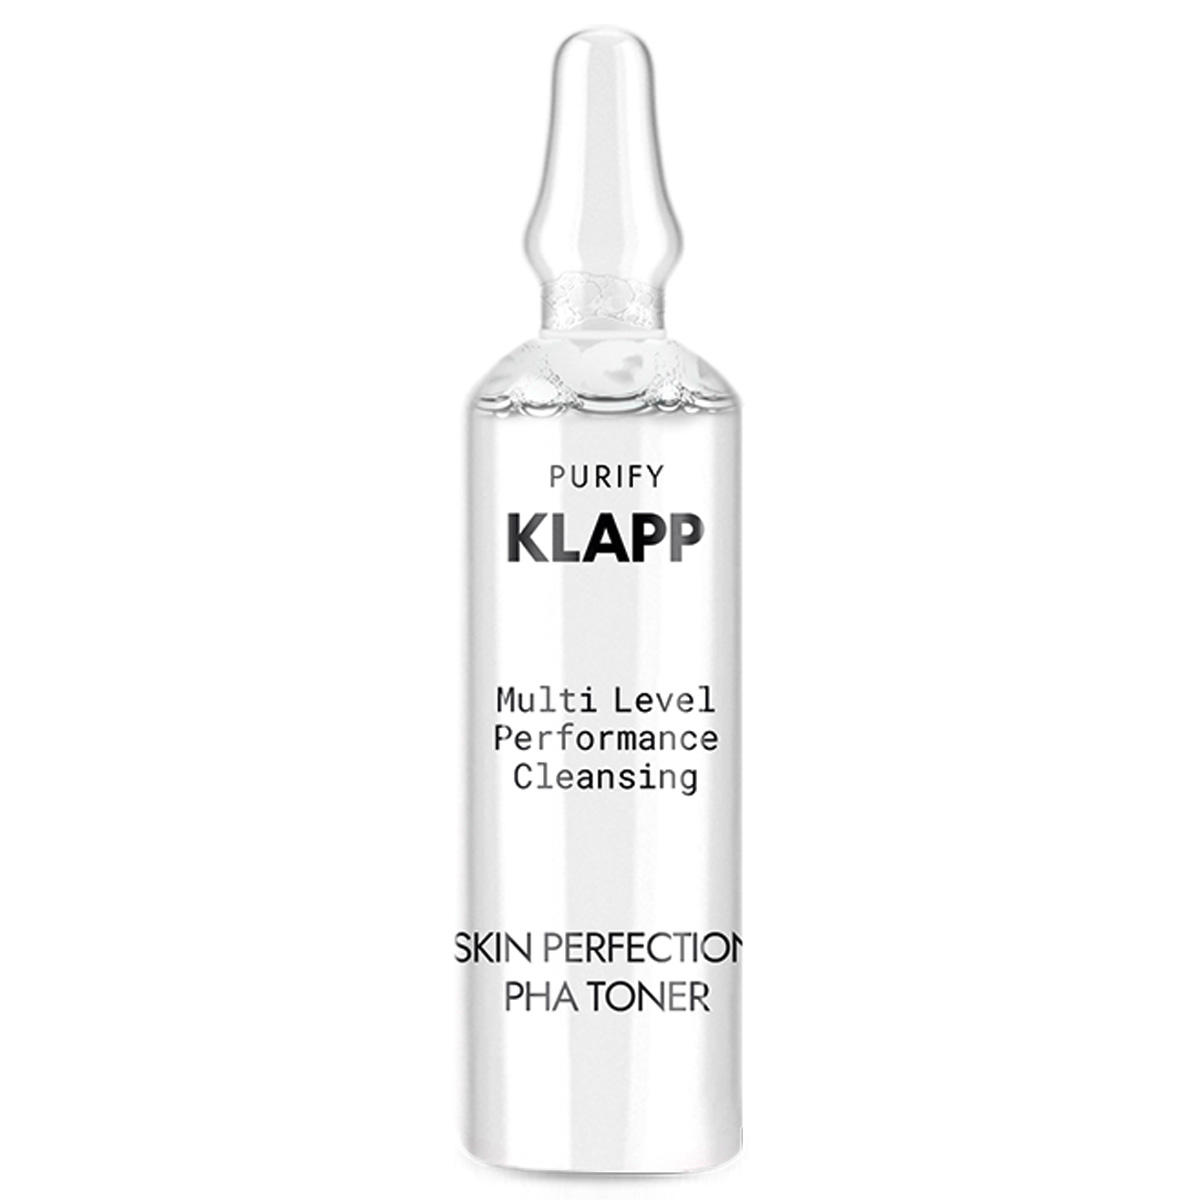 KLAPP Multi Level Performance Cleansing Triple Action Discovery Set  - 2